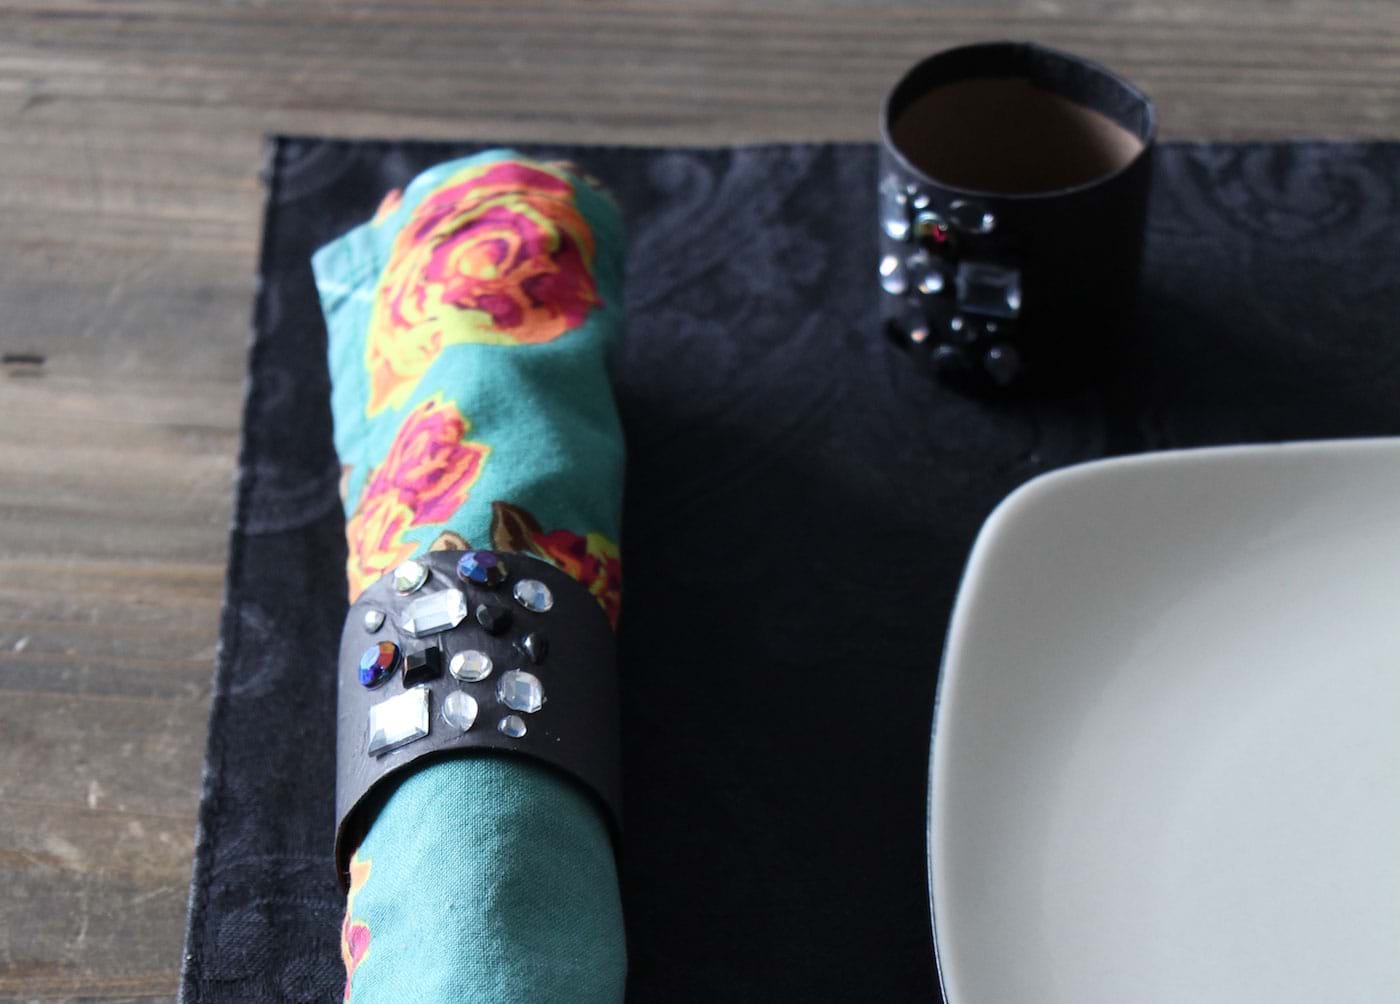 Napkin rings made from toilet paper roll crafts